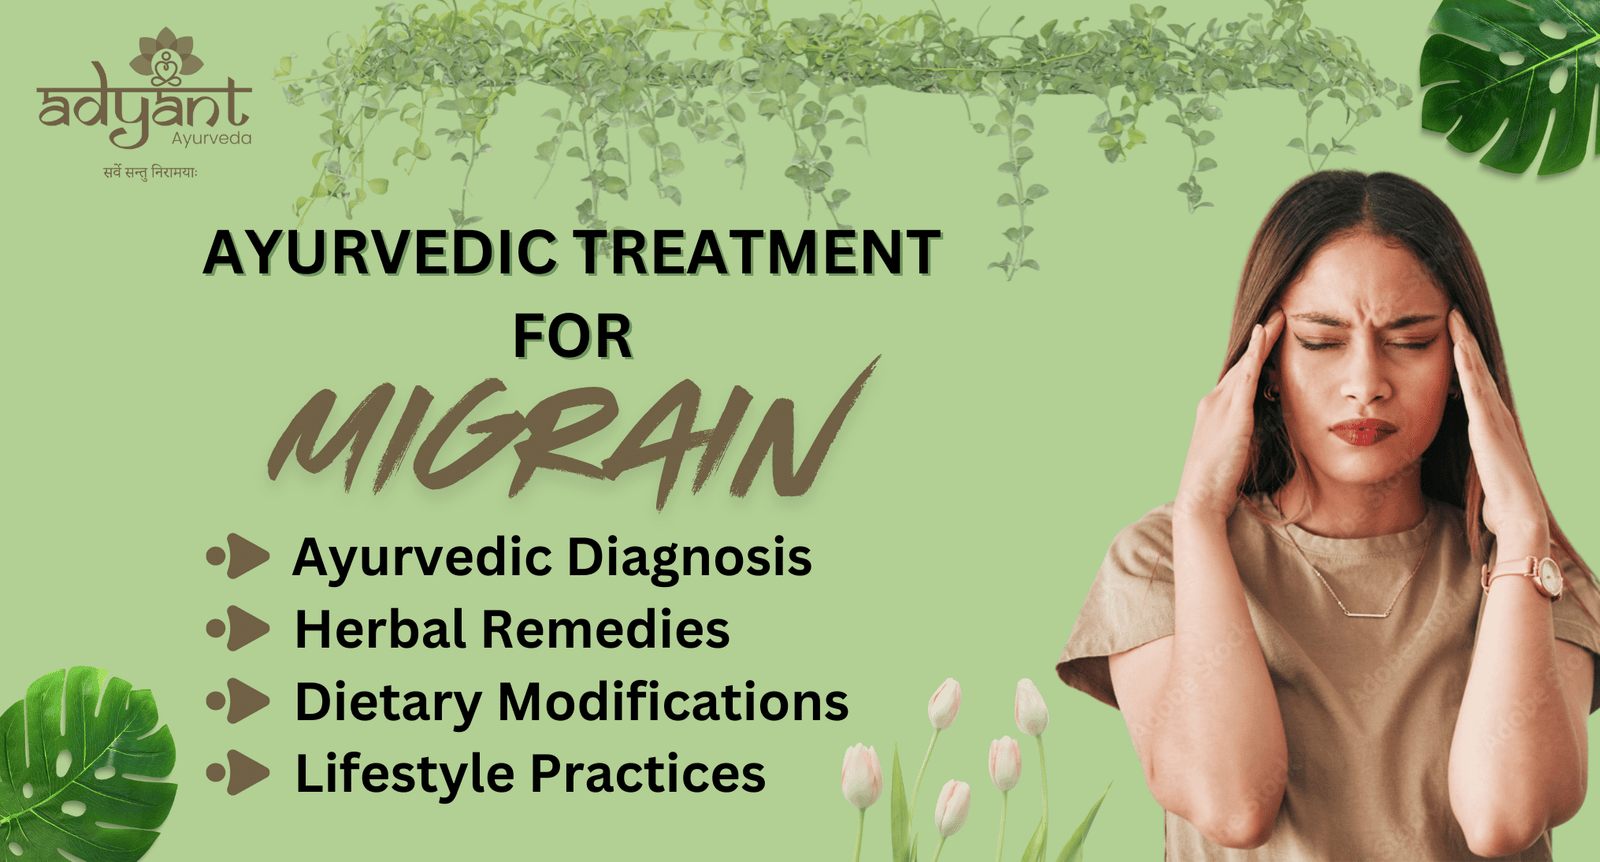 You are currently viewing Migraine Treatment in Ayurveda: Symptoms, Causes, Home Remedies, Diet, & Lifestyle Changes